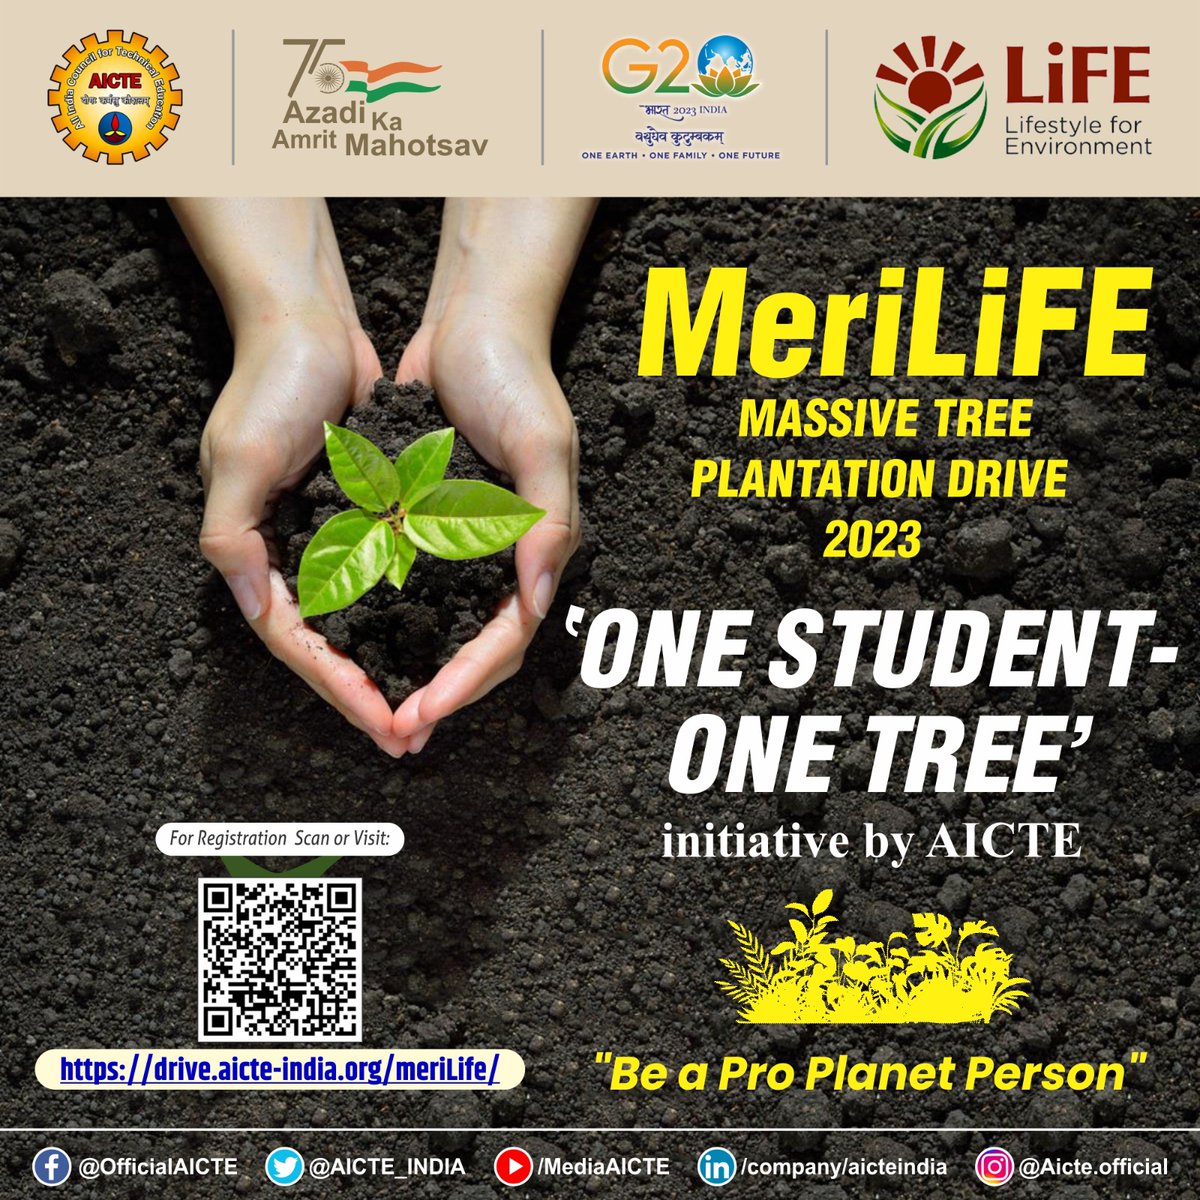 'Each one...plant one,' AICTE introduces an exciting incentive for participating in tree plantation initiatives. Students, faculty, and staff members who actively contribute to this noble cause will be acknowledged as Pro Planet People.
#MeriLiFE #PlantationDrive #AICTE…